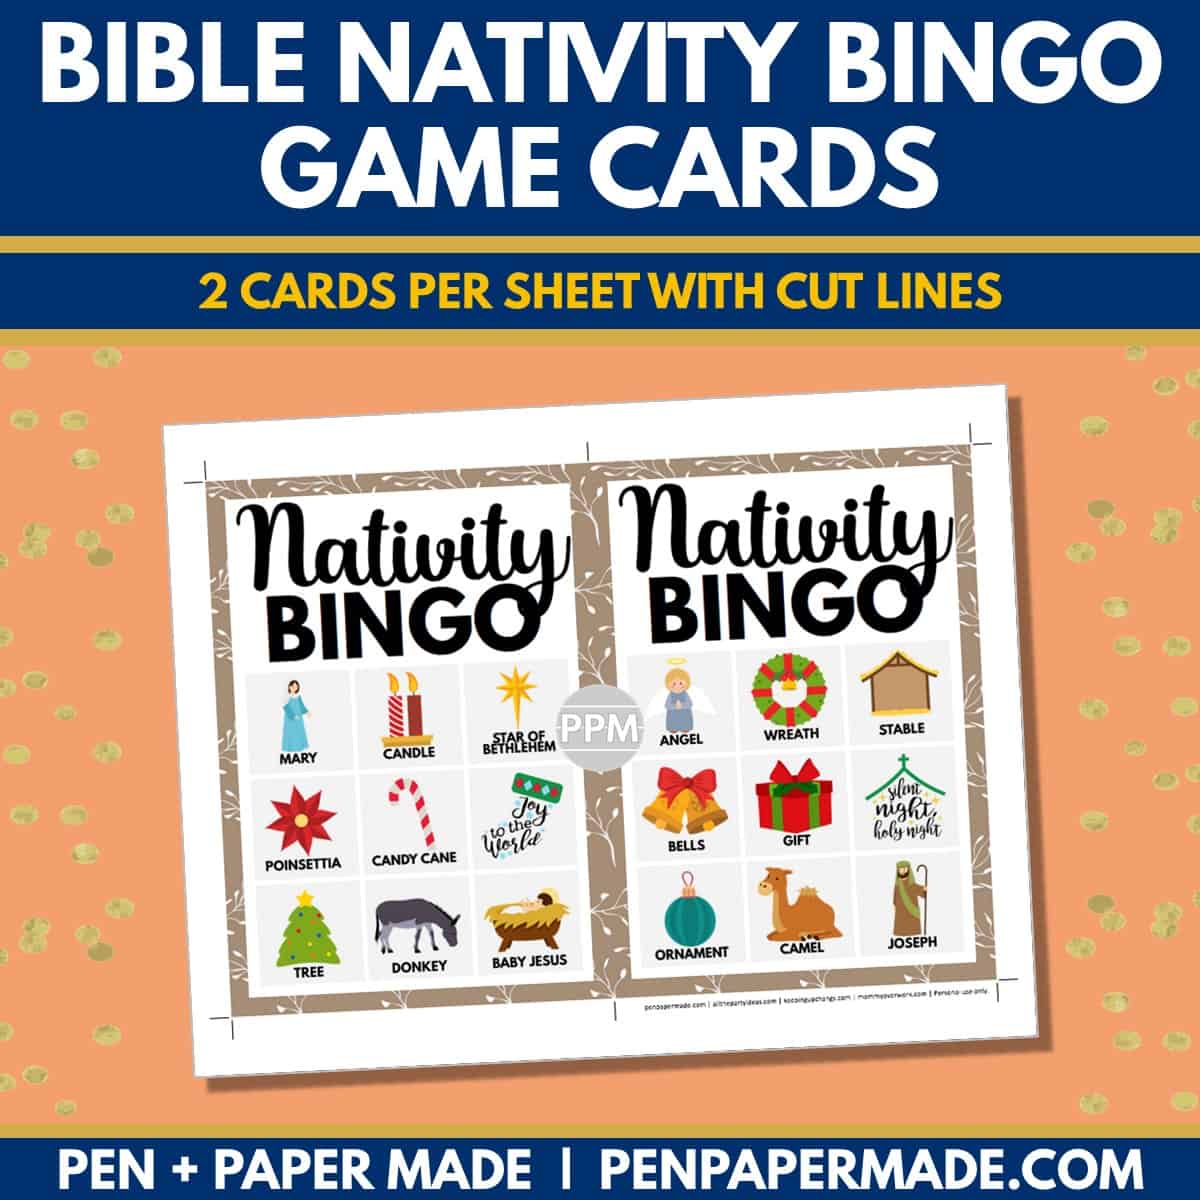 bible nativity christmas bingo card 3x3 5x7 game boards with images and text words.